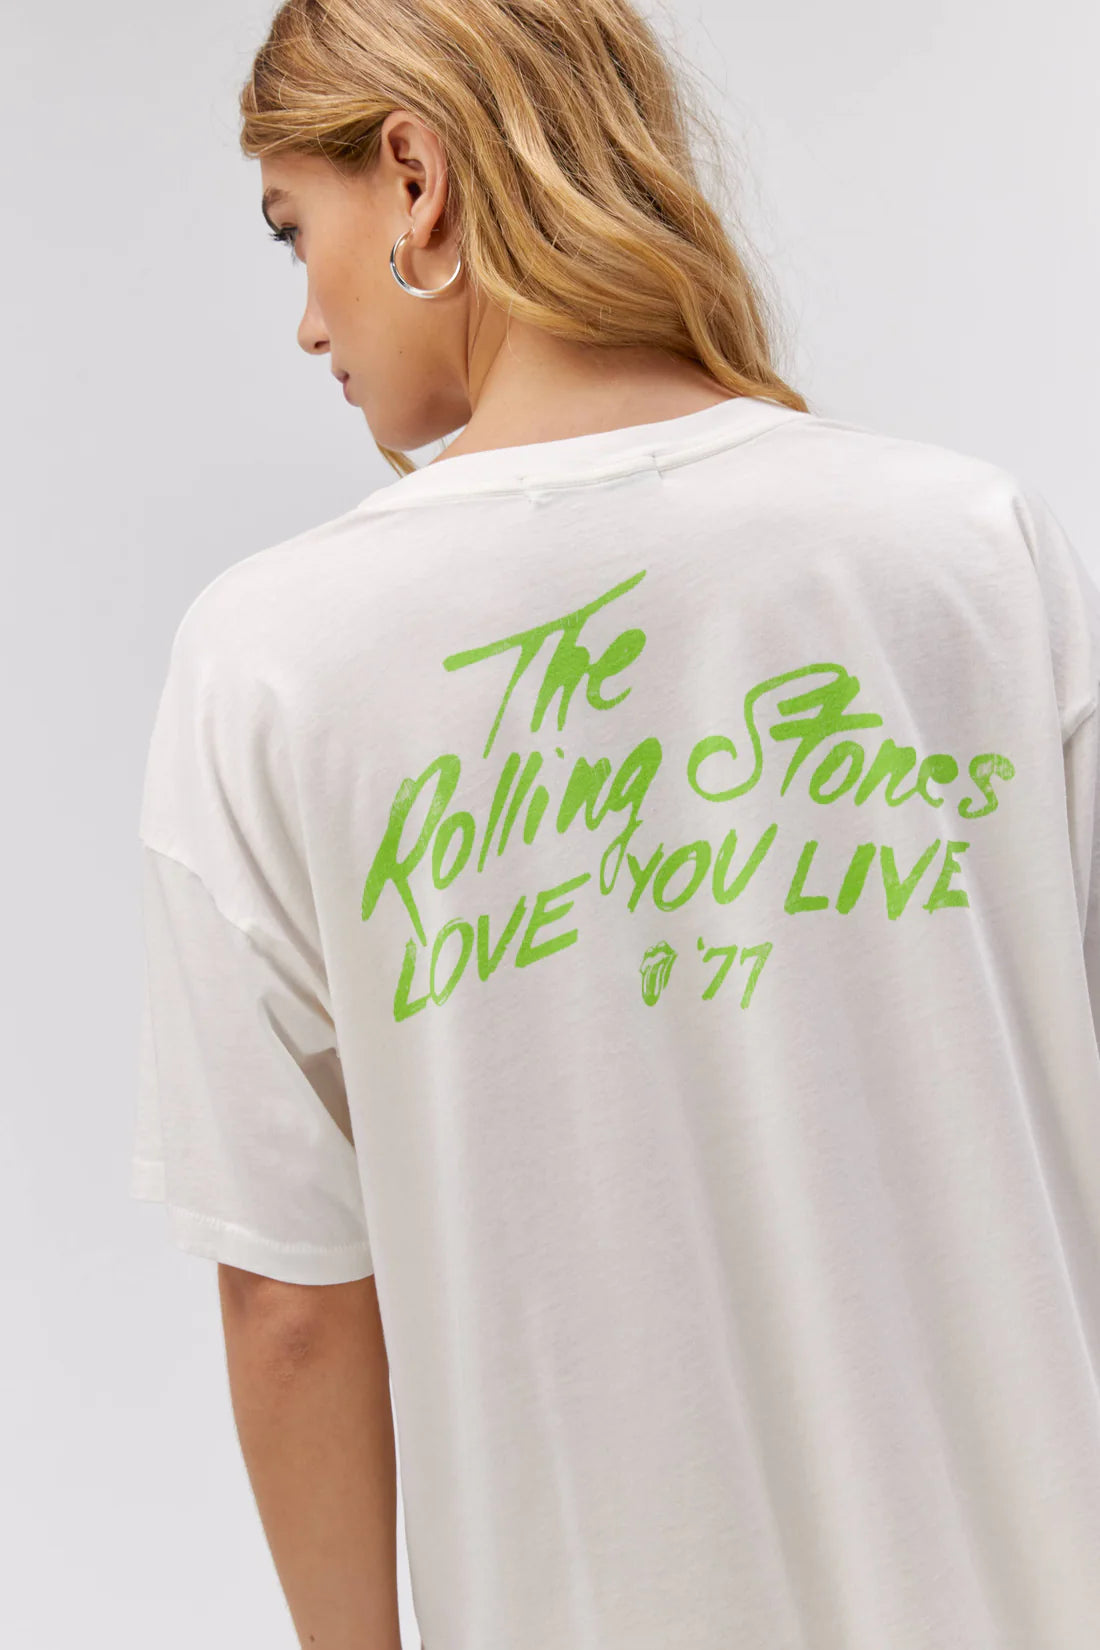 Rolling Stones Love You Live '77 Merch Tee